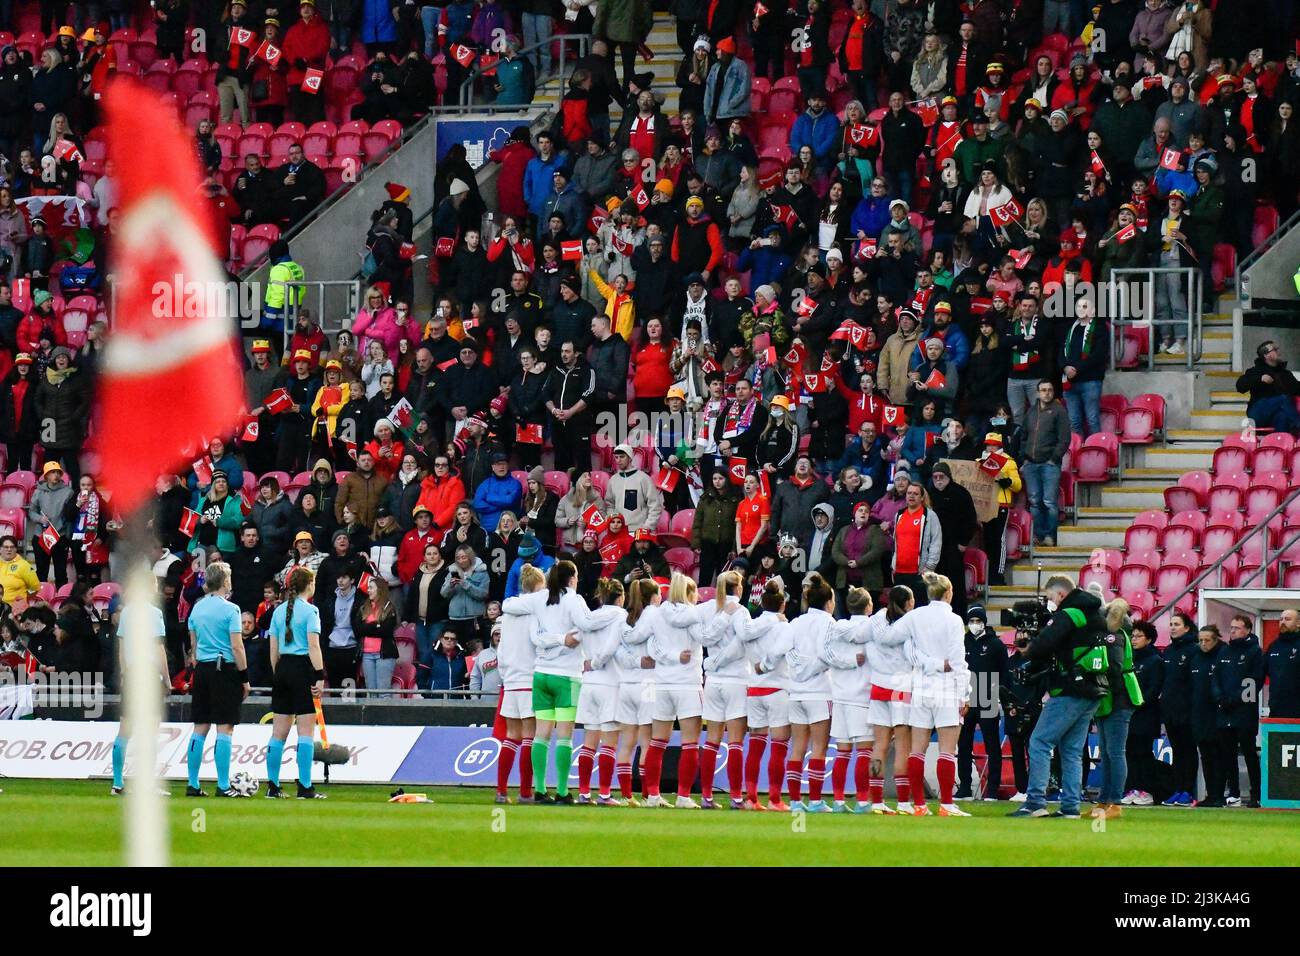 Llanelli, Wales. 8 April 2022. The Wales Women's team line-up for the National Anthems before the FIFA Women's World Cup Qualifier Group I match between Wales Women and France Women at Parc y Scarlets in Llanelli, Wales, UK on 8 April 2022. Credit: Duncan Thomas/Majestic Media. Stock Photo